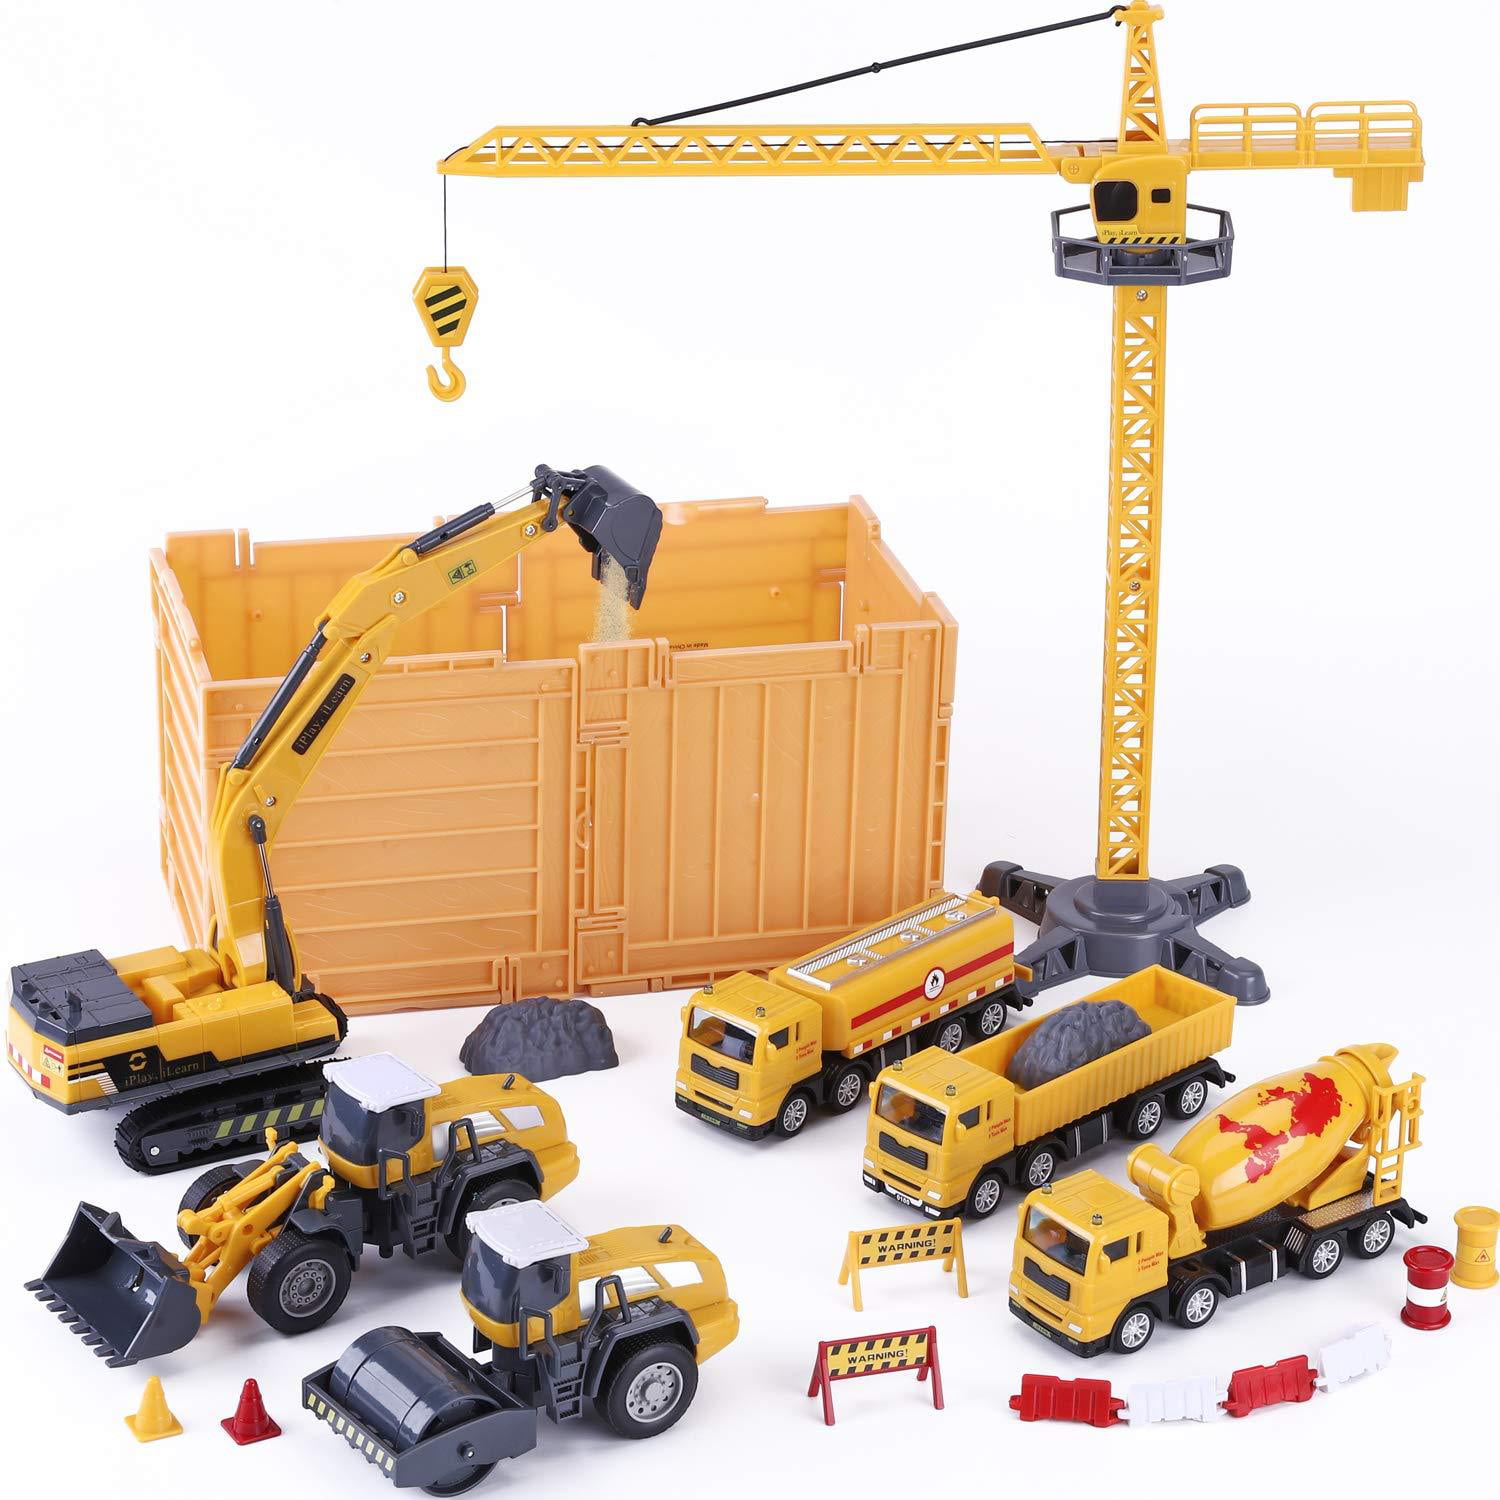 iPlay iLearn Construction Site Vehicles Toy Kids Engineering Playset Gift 